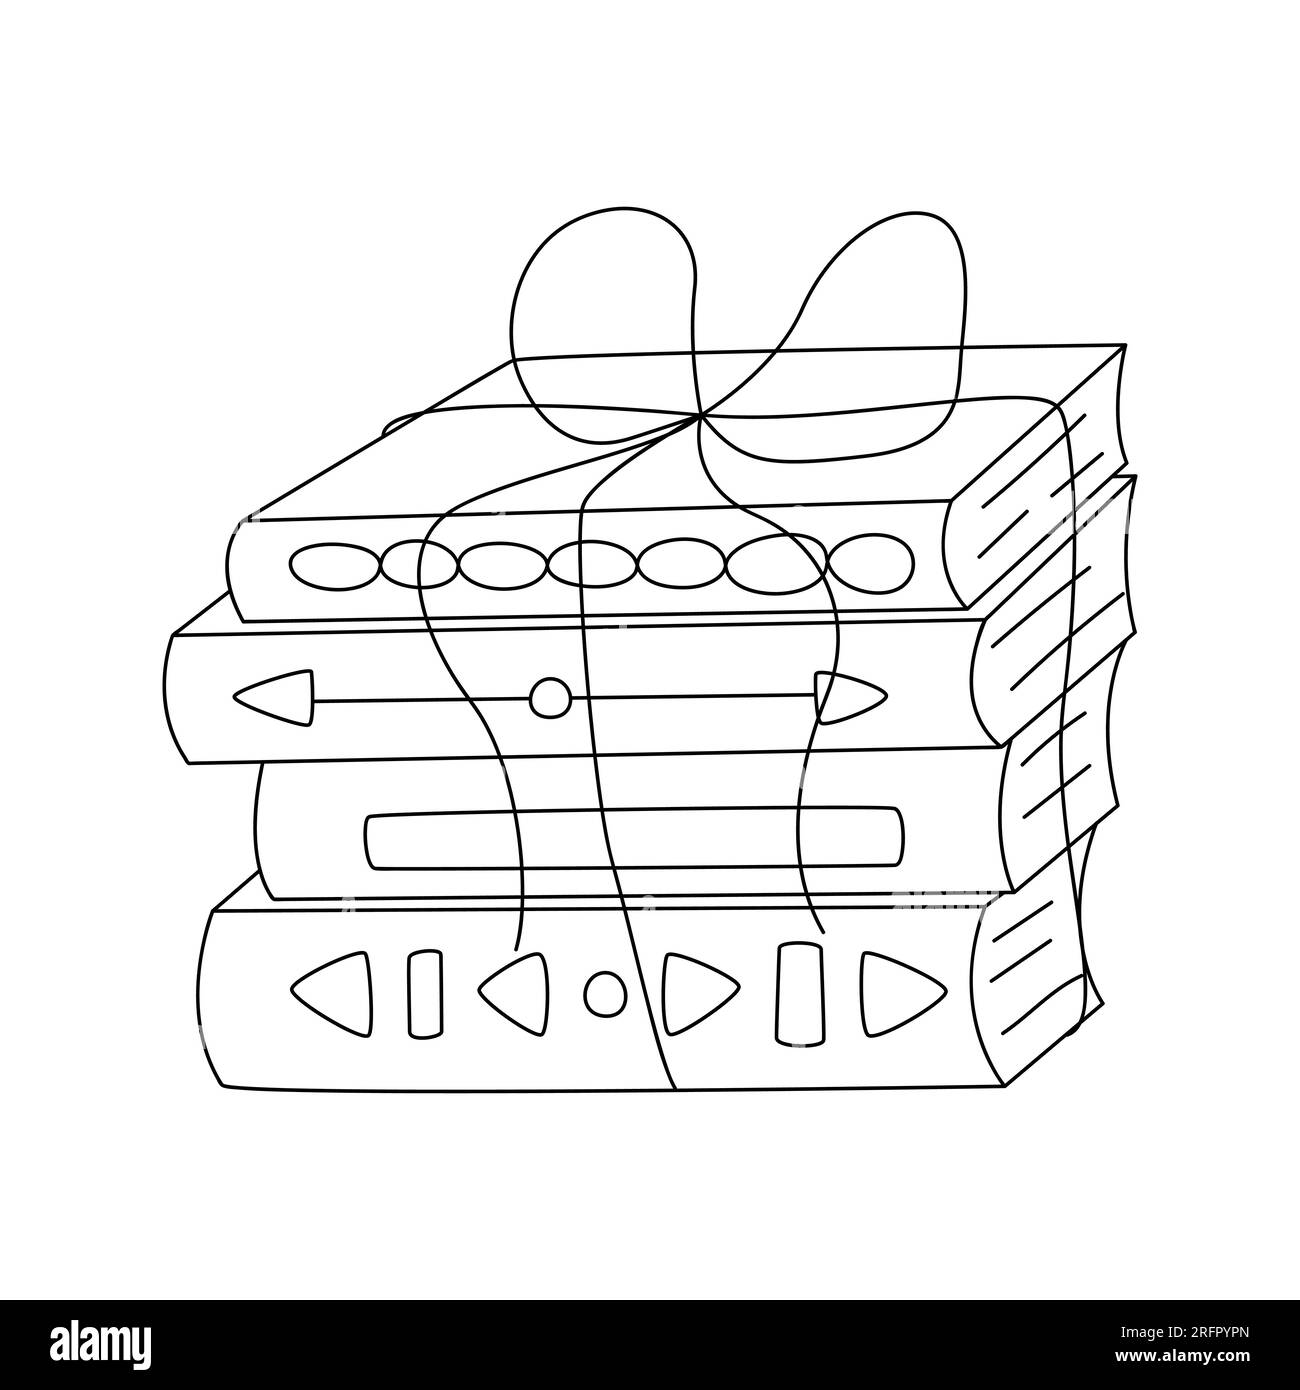 stack of books black and white clipart